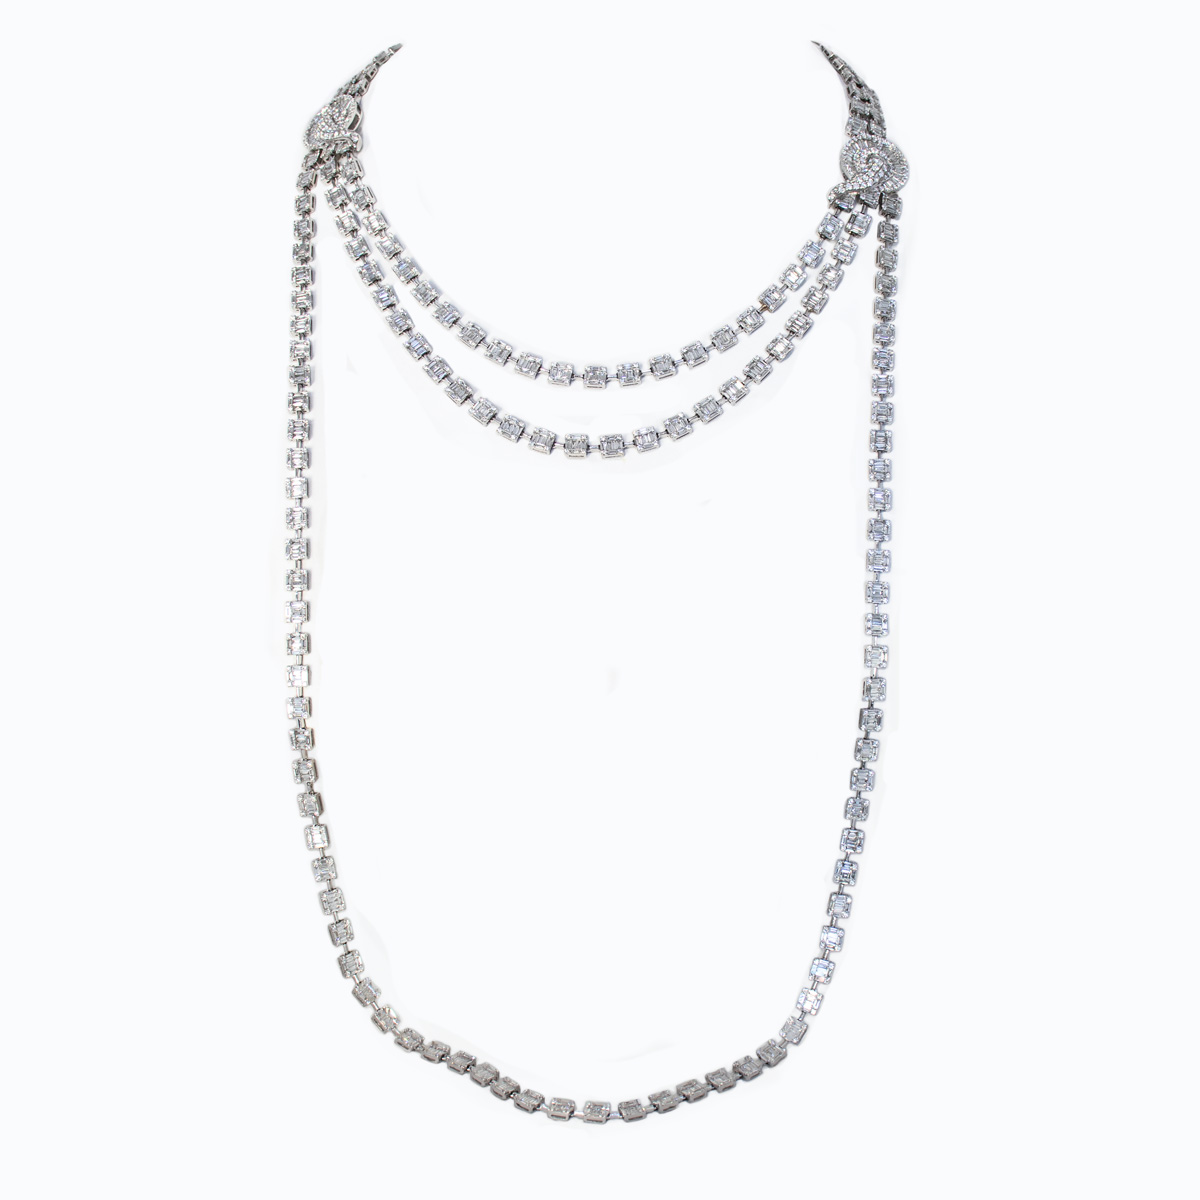 5.7mm Diamond-Cut Curb Chain Necklace in 14K White Gold - 24